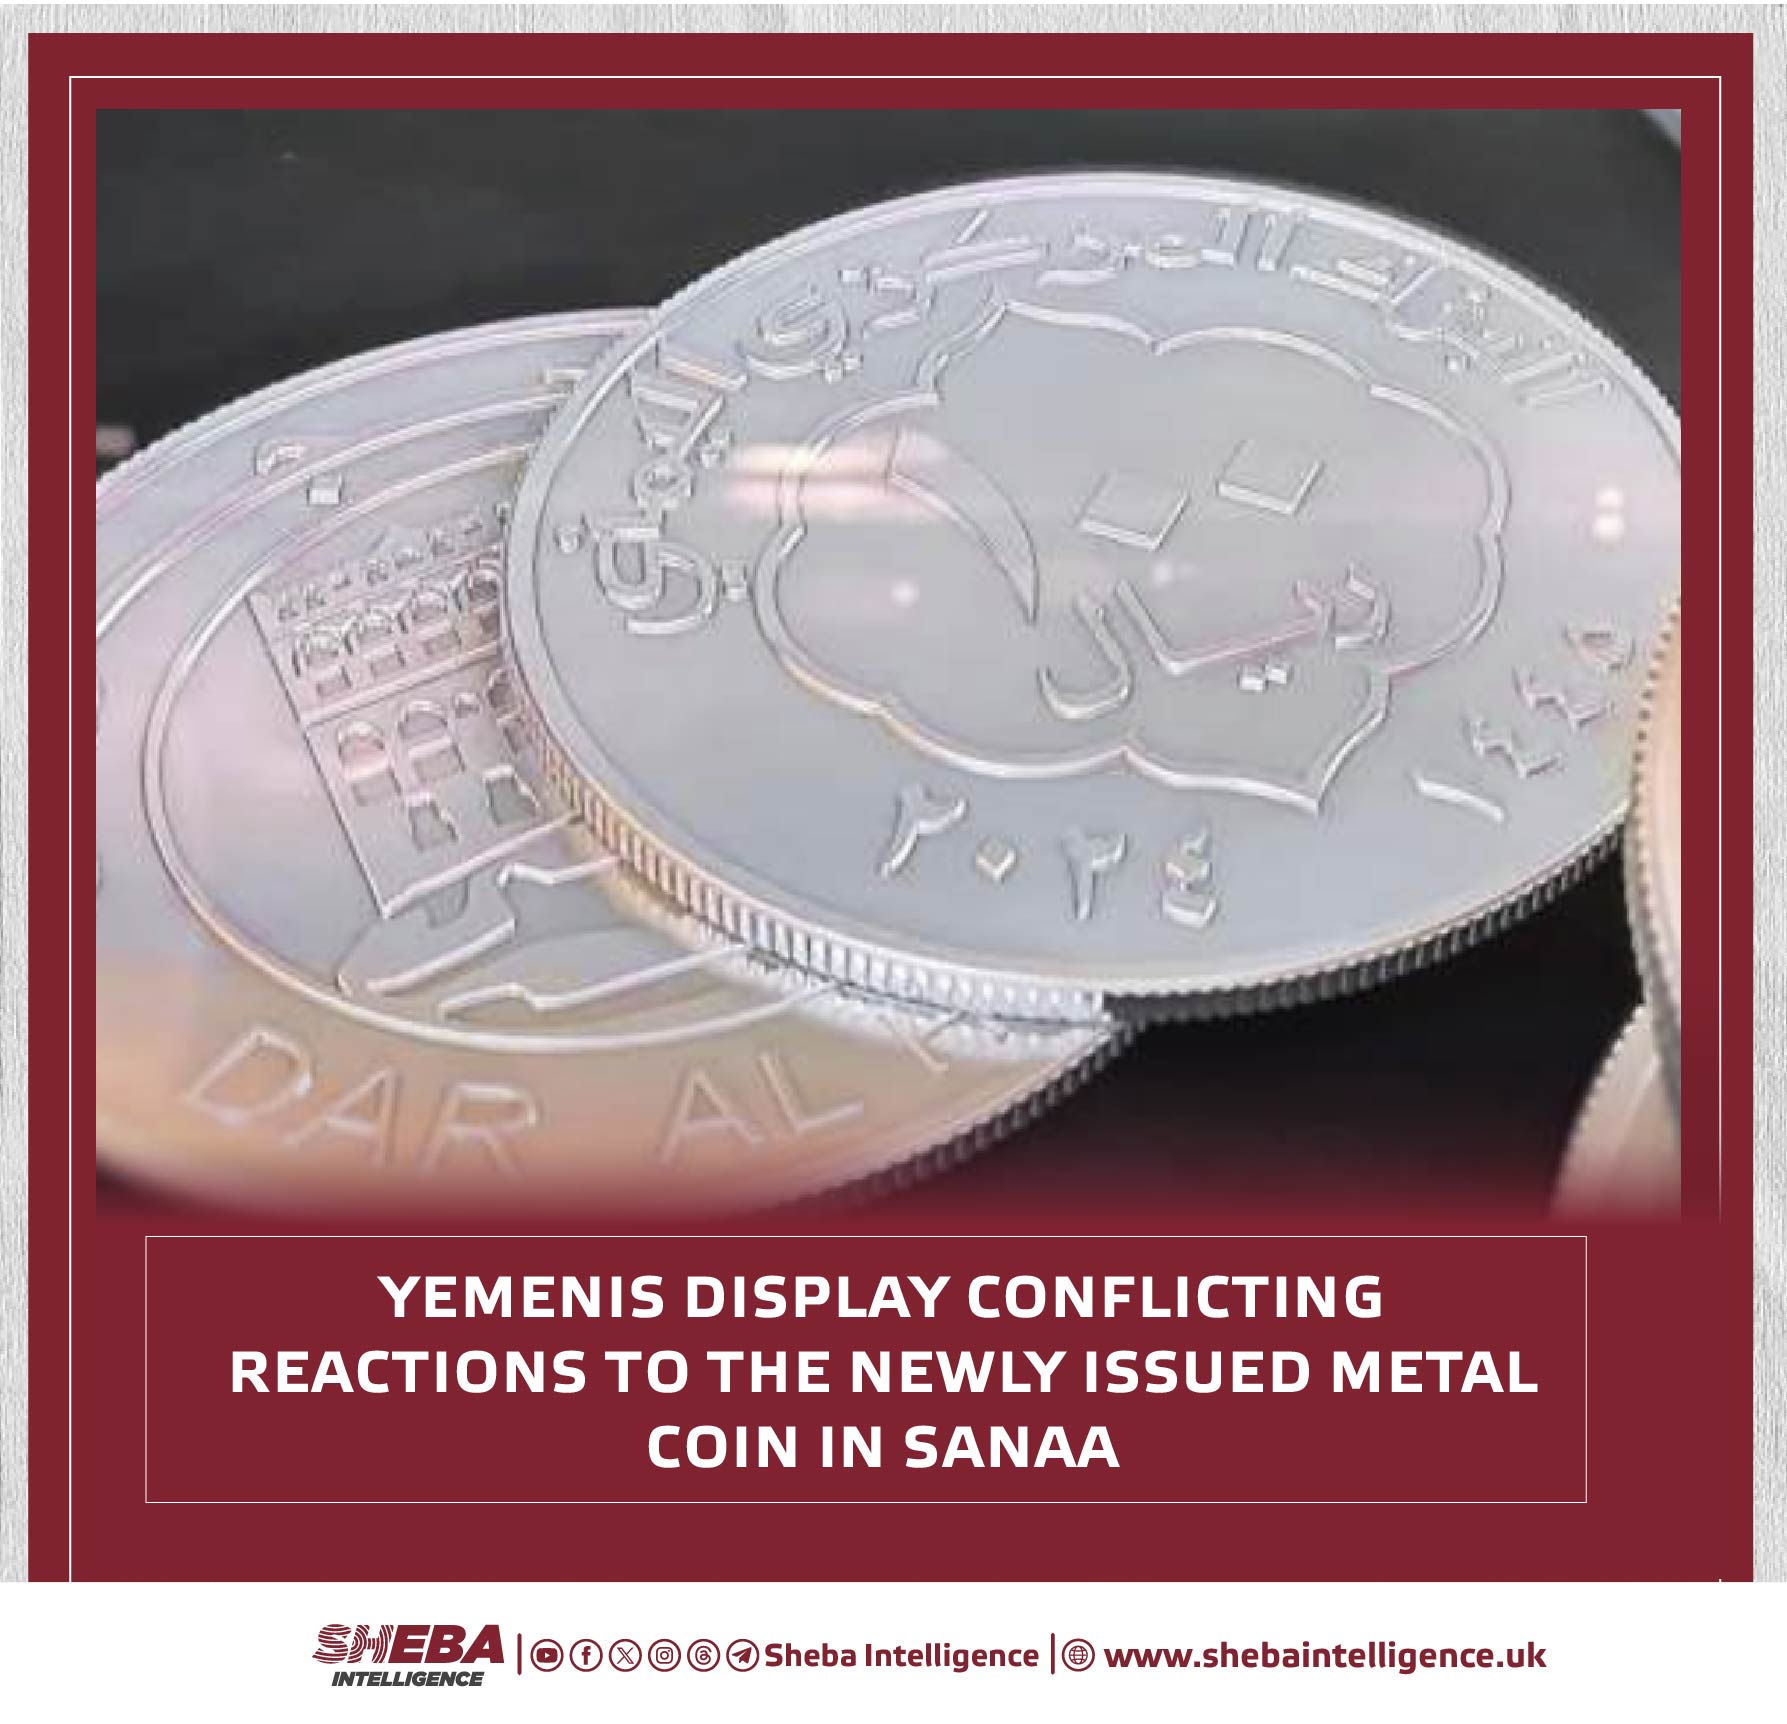 Yemenis Display Conflicting Reactions to the Newly Issued Metal Coin in Sanaa